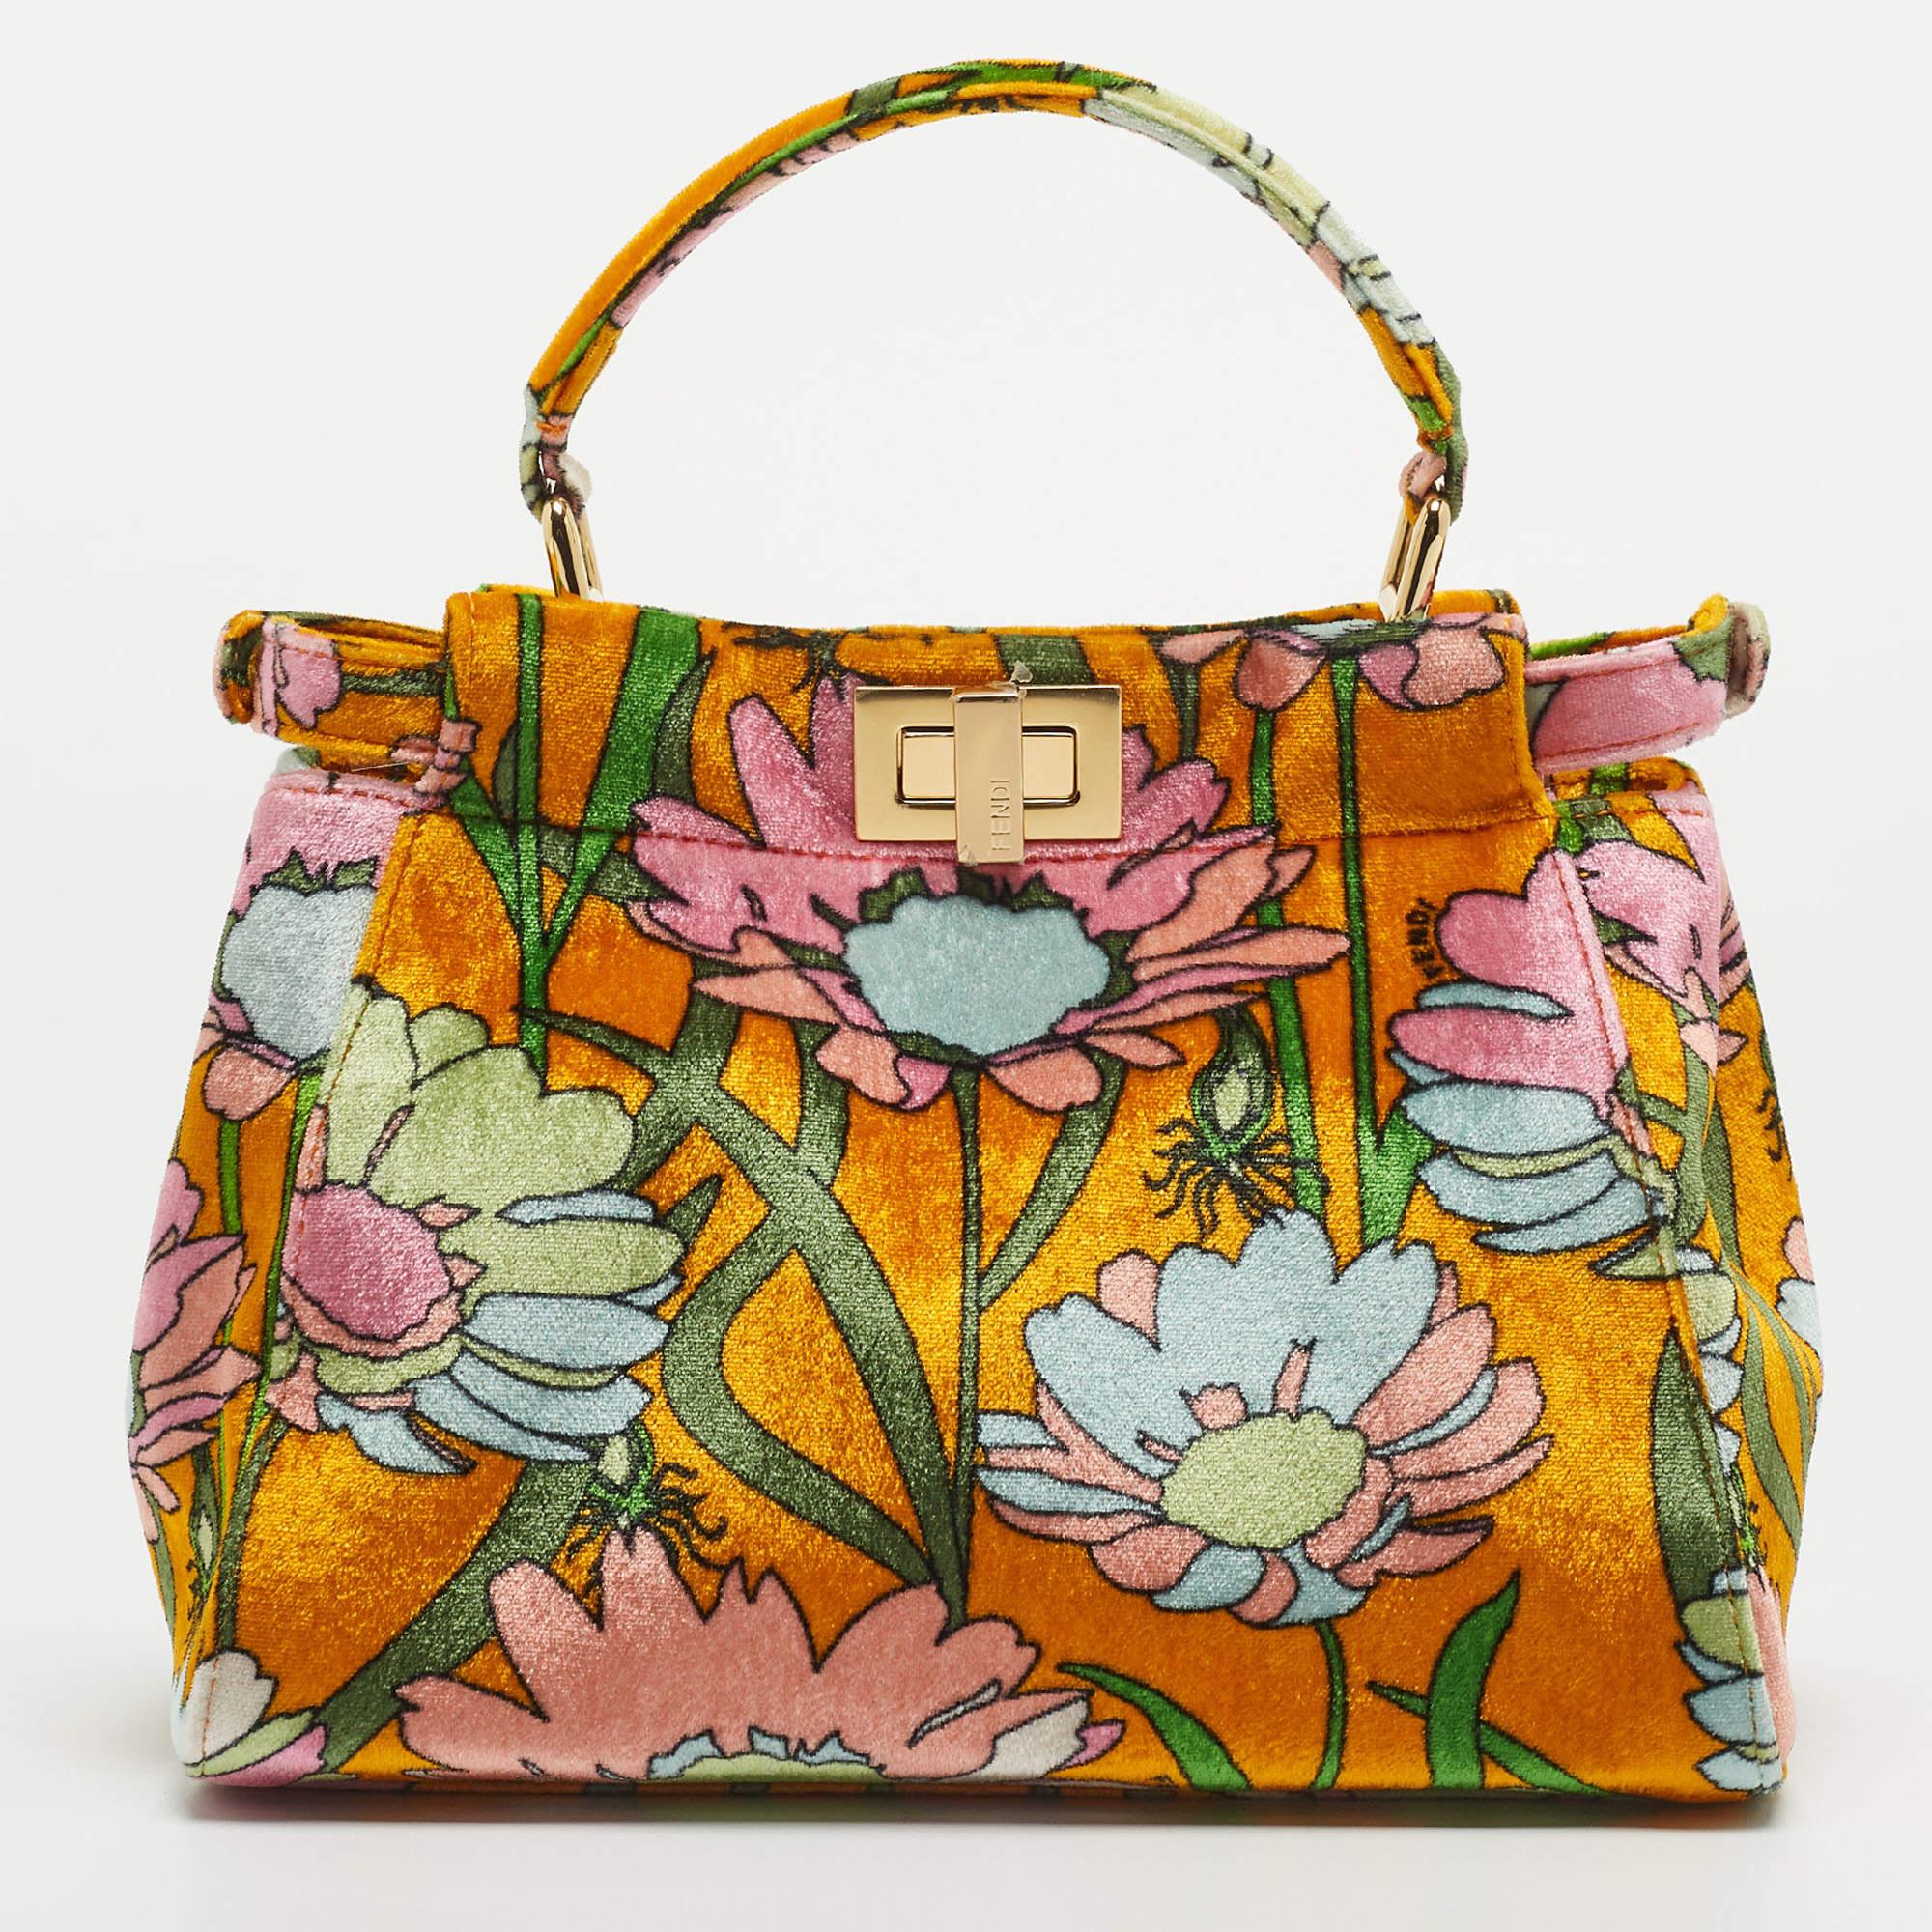 Designed by Venturini Fendi, the Peekaboo was first debuted in 2008. The unique construction and representation of this bag enable it to keep up with fashion's ever-changing tide. Constructed from floral printed velvet, it is complemented with